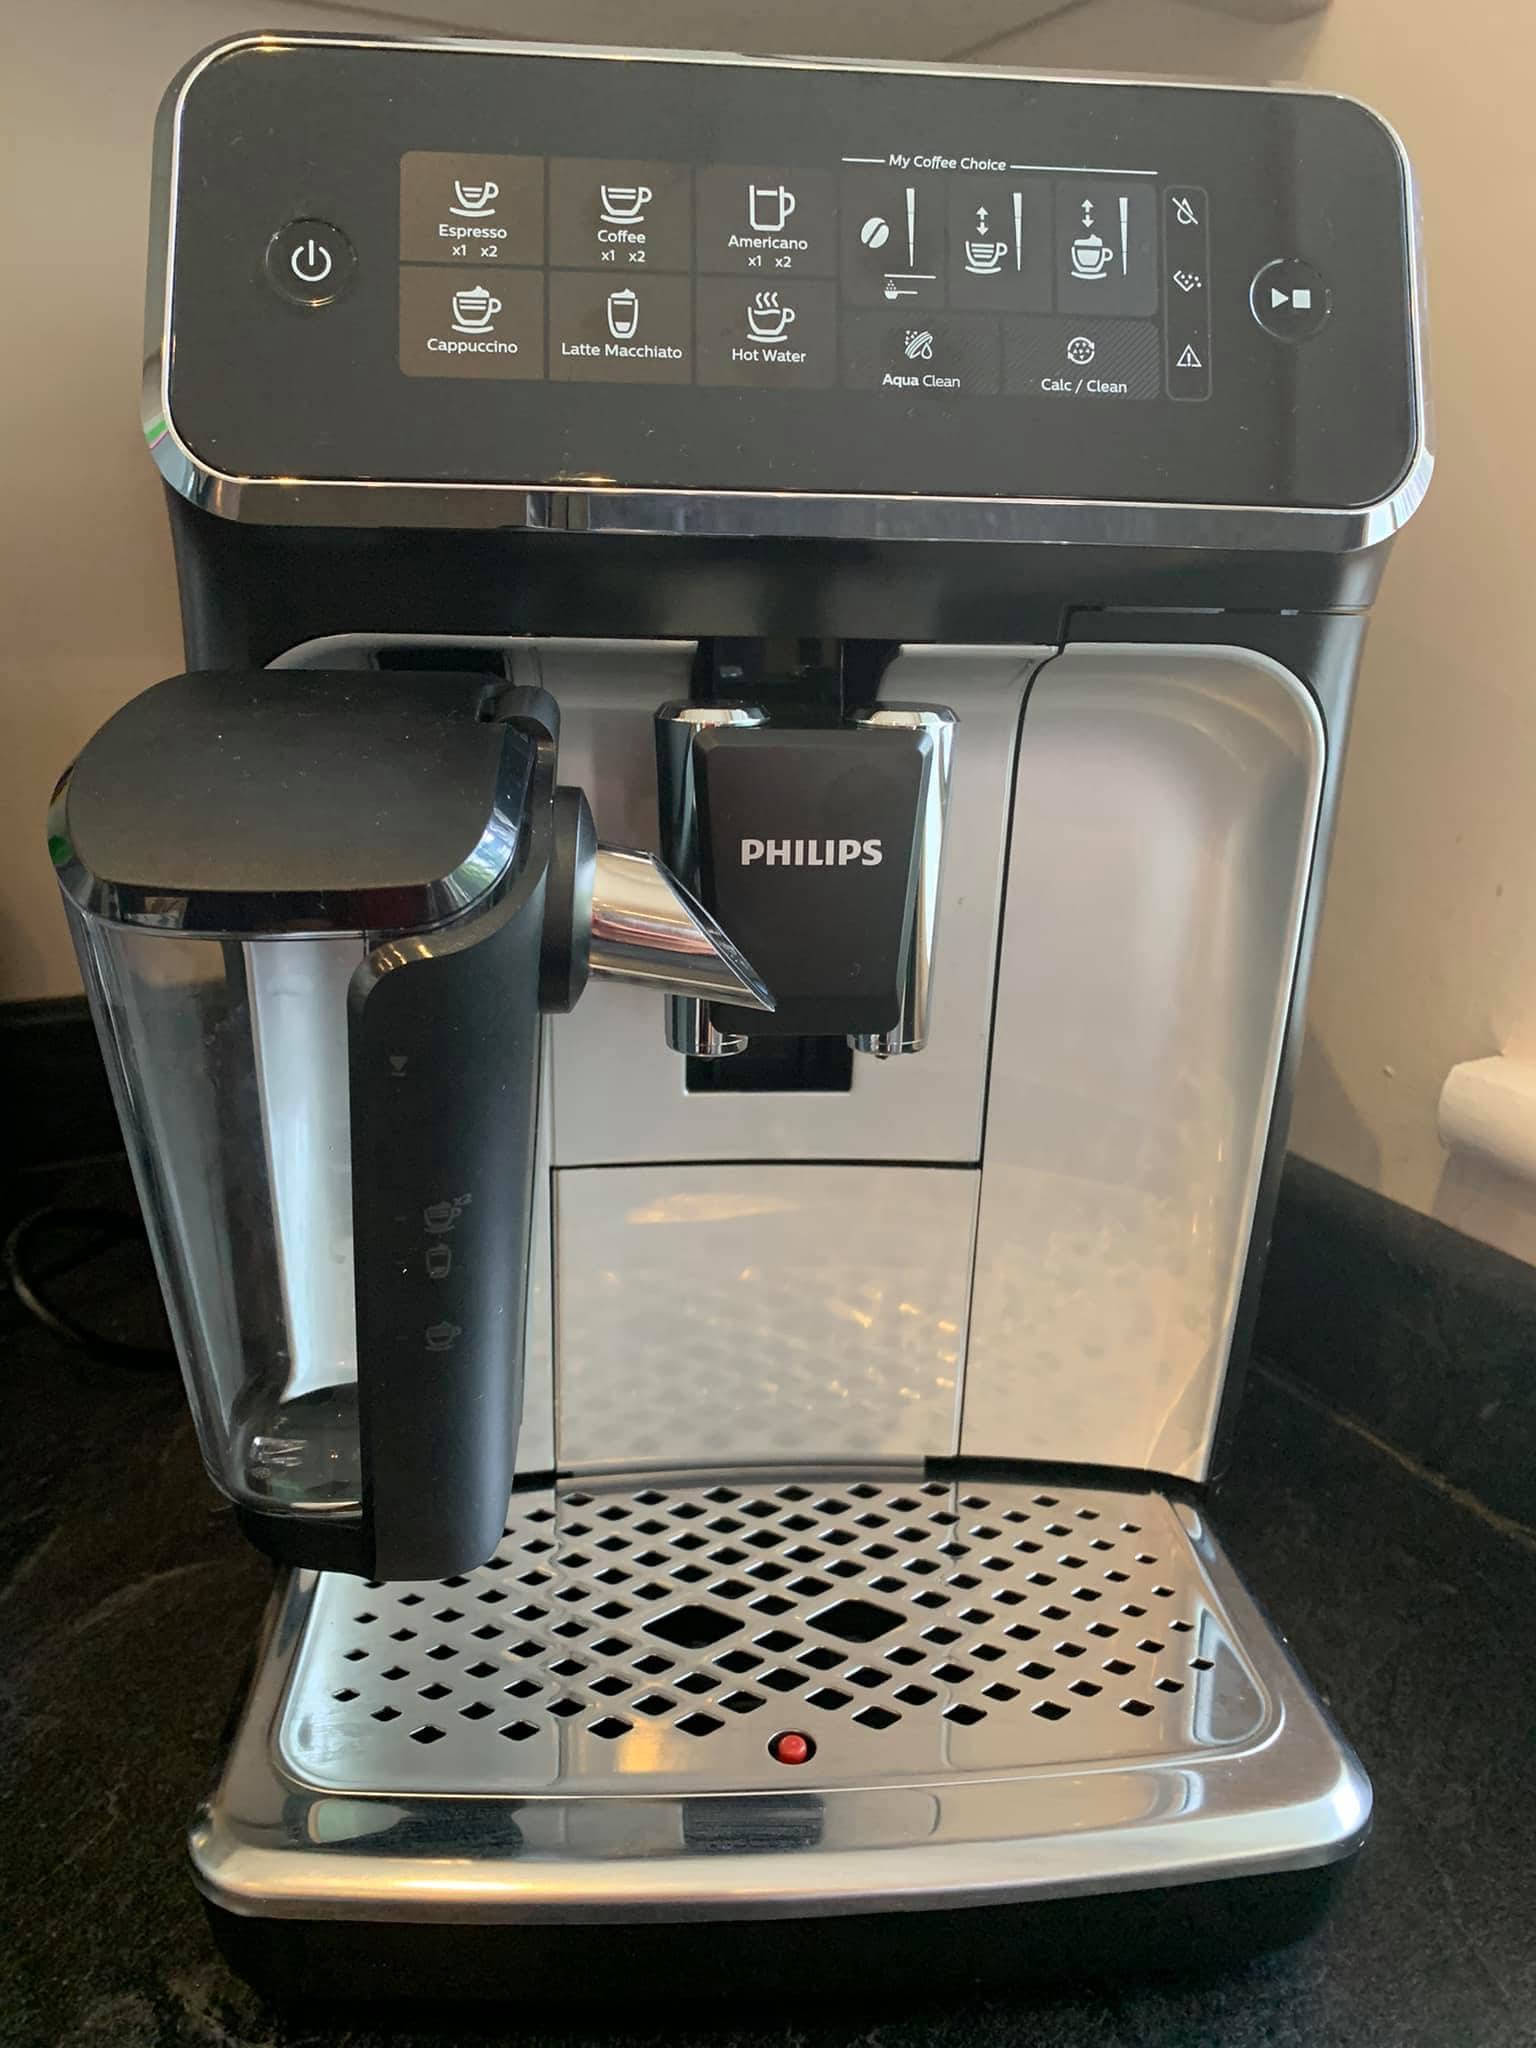 Philips 3200 Lattego has a simple cleaning system